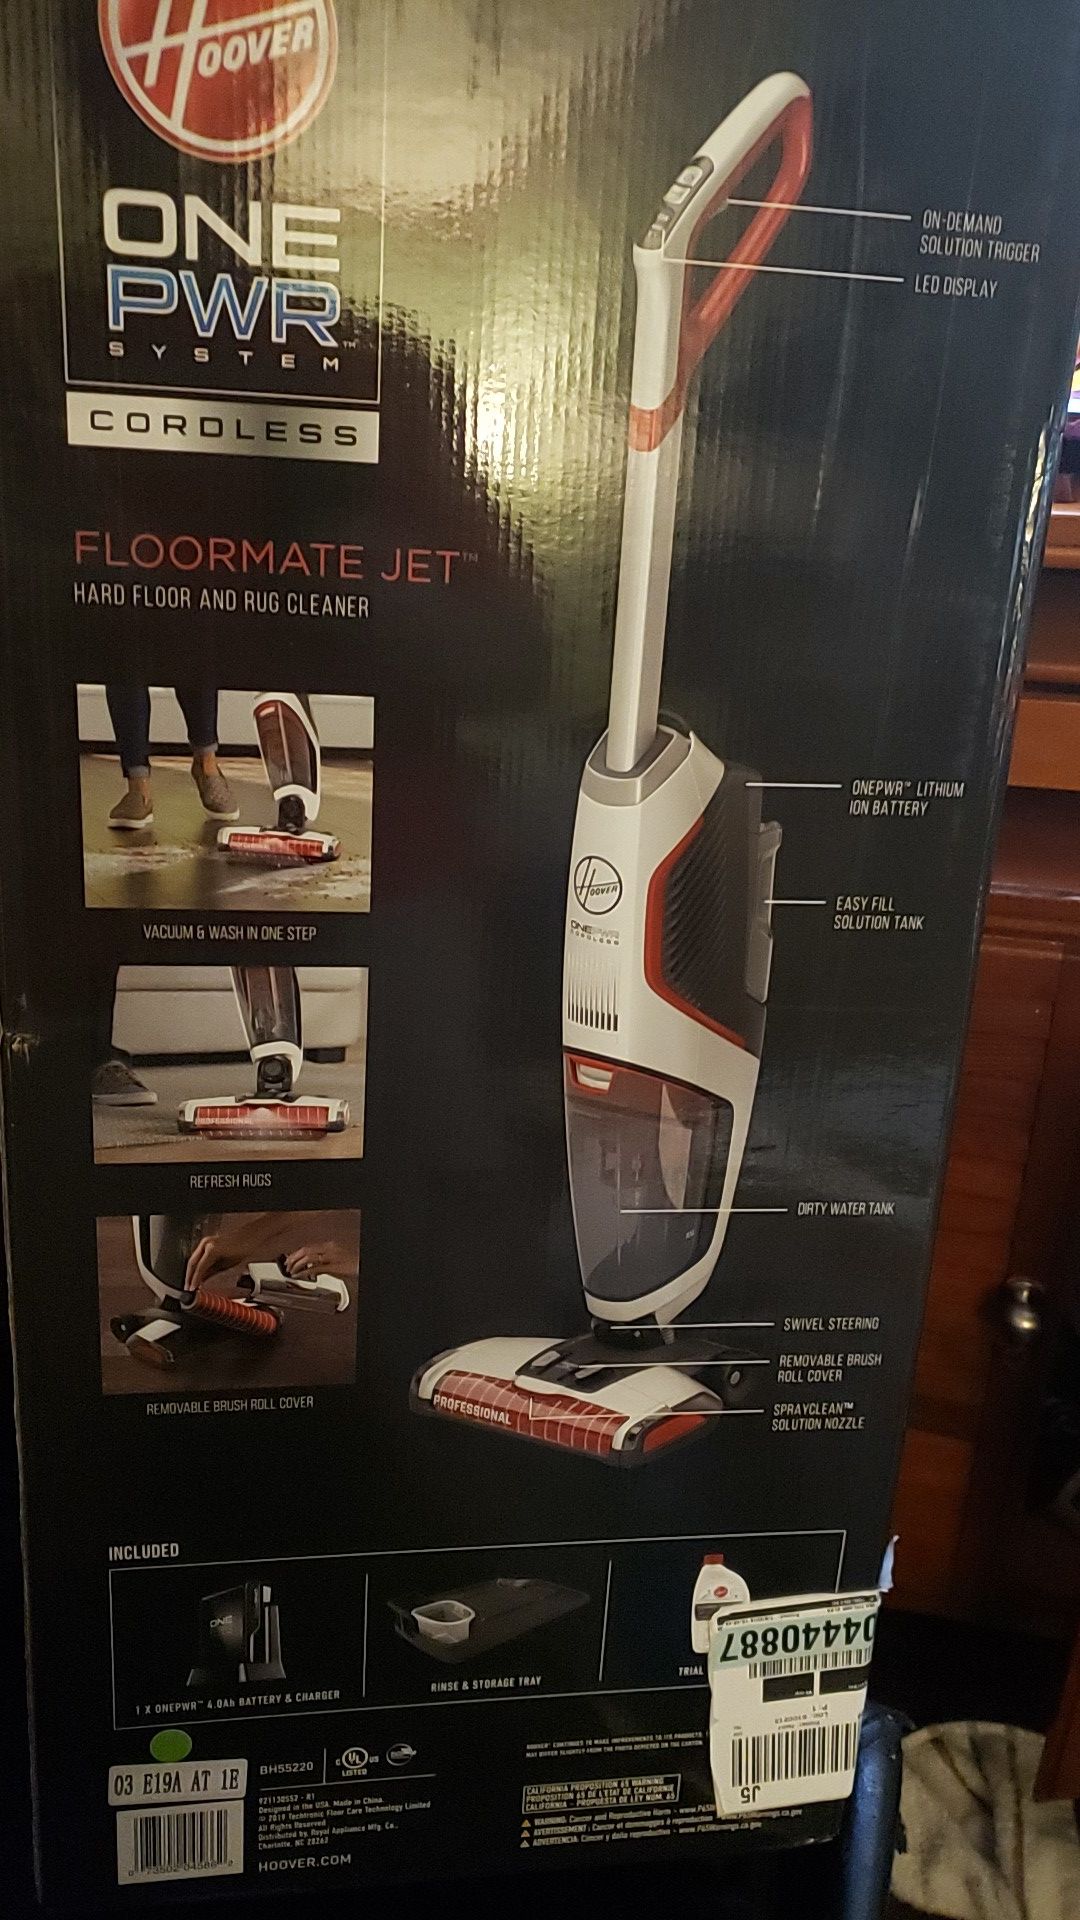 Hoover one power system cordless